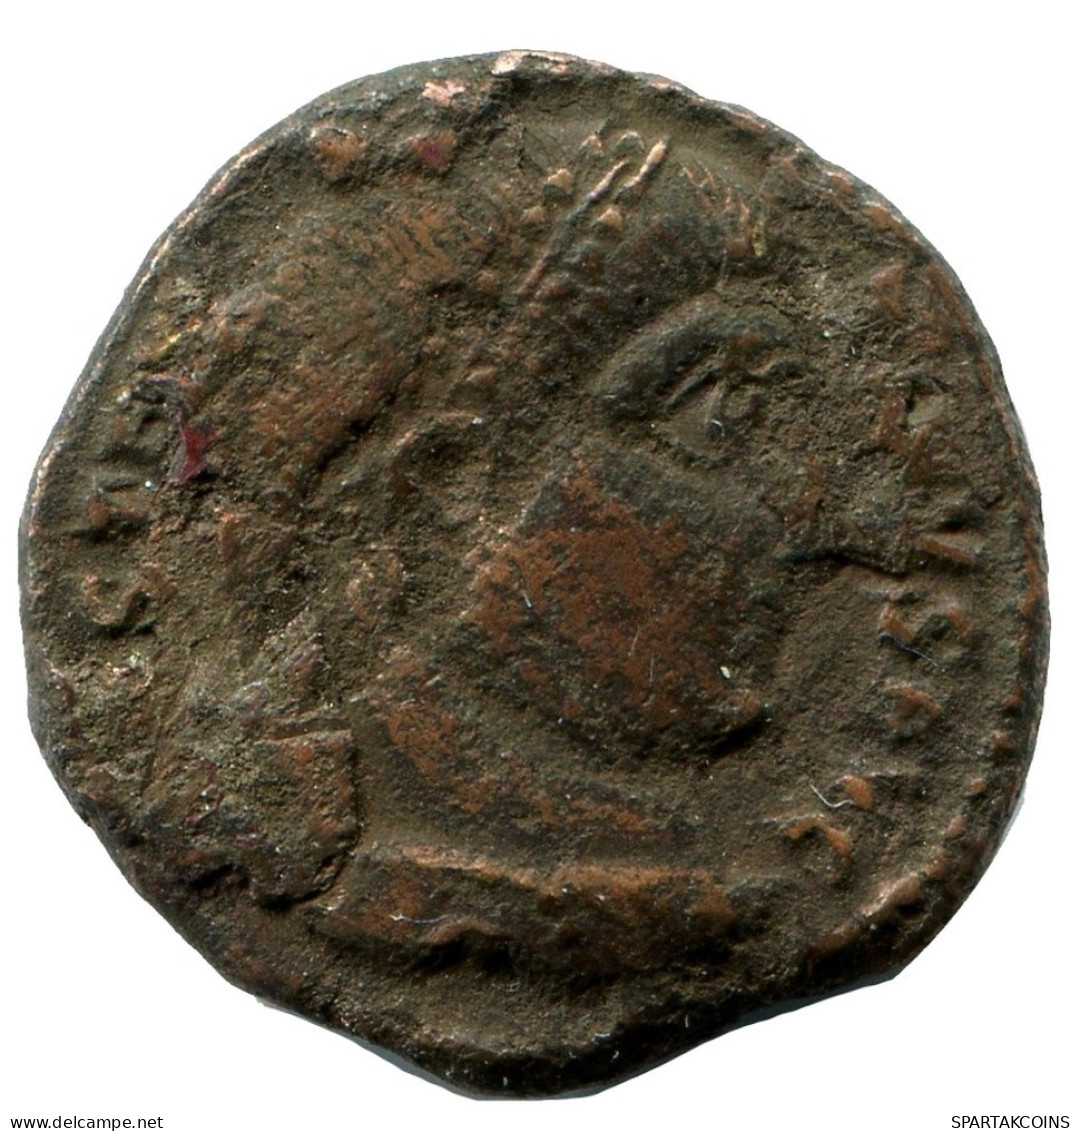 CONSTANTINE I MINTED IN HERACLEA FOUND IN IHNASYAH HOARD EGYPT #ANC11218.14.E.A - El Imperio Christiano (307 / 363)